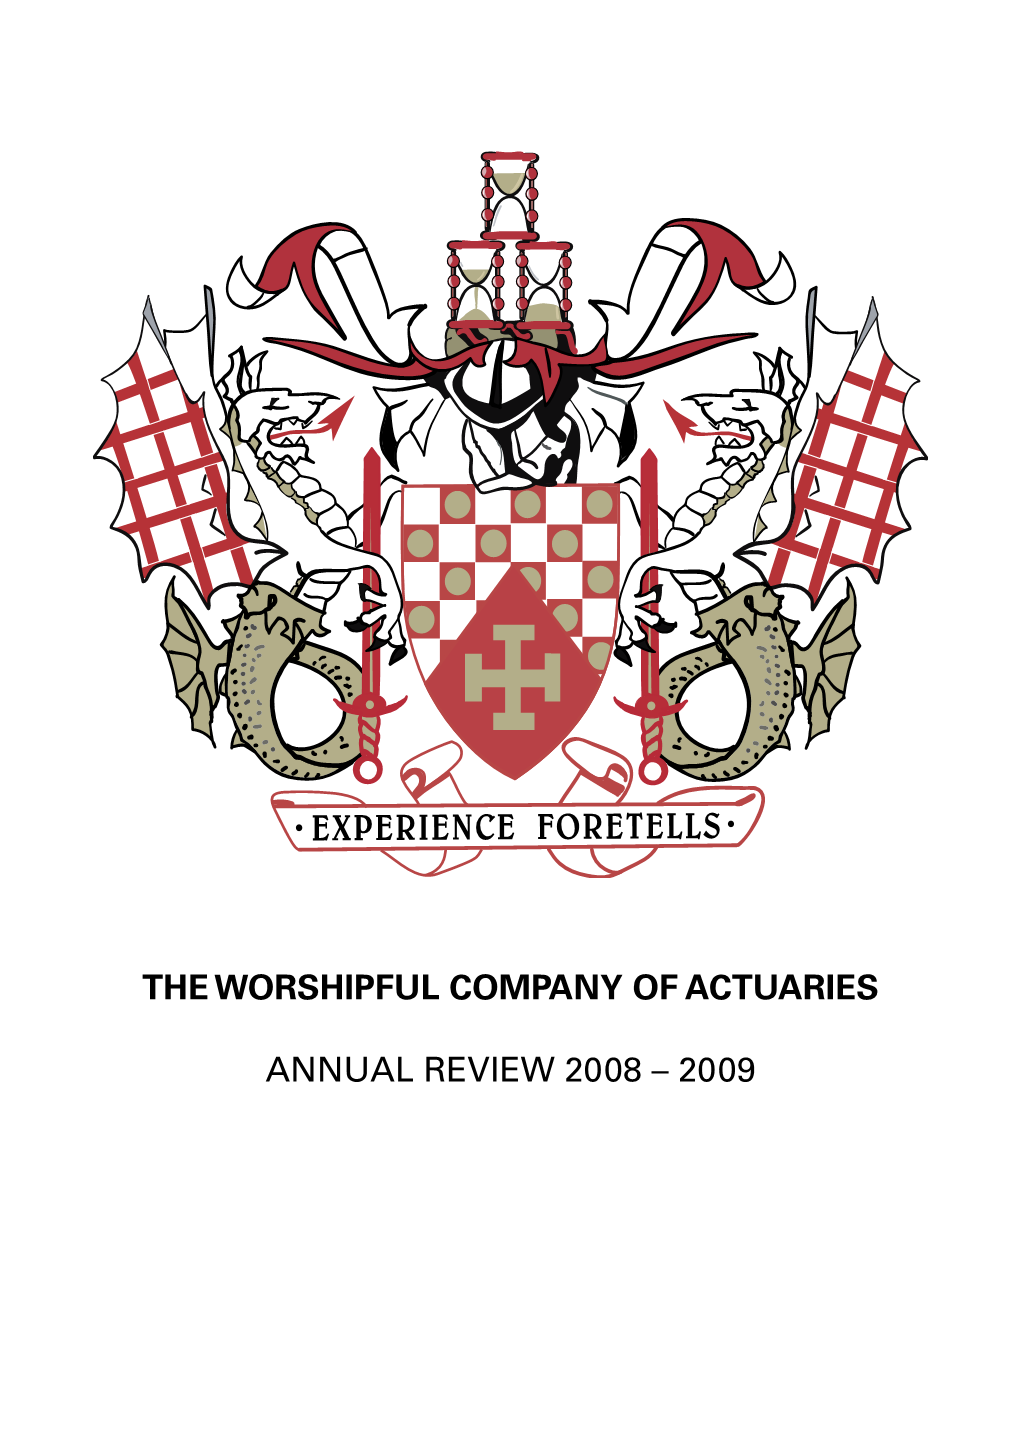 The Worshipful Company of Actuaries Annual Review 2008 – 2009